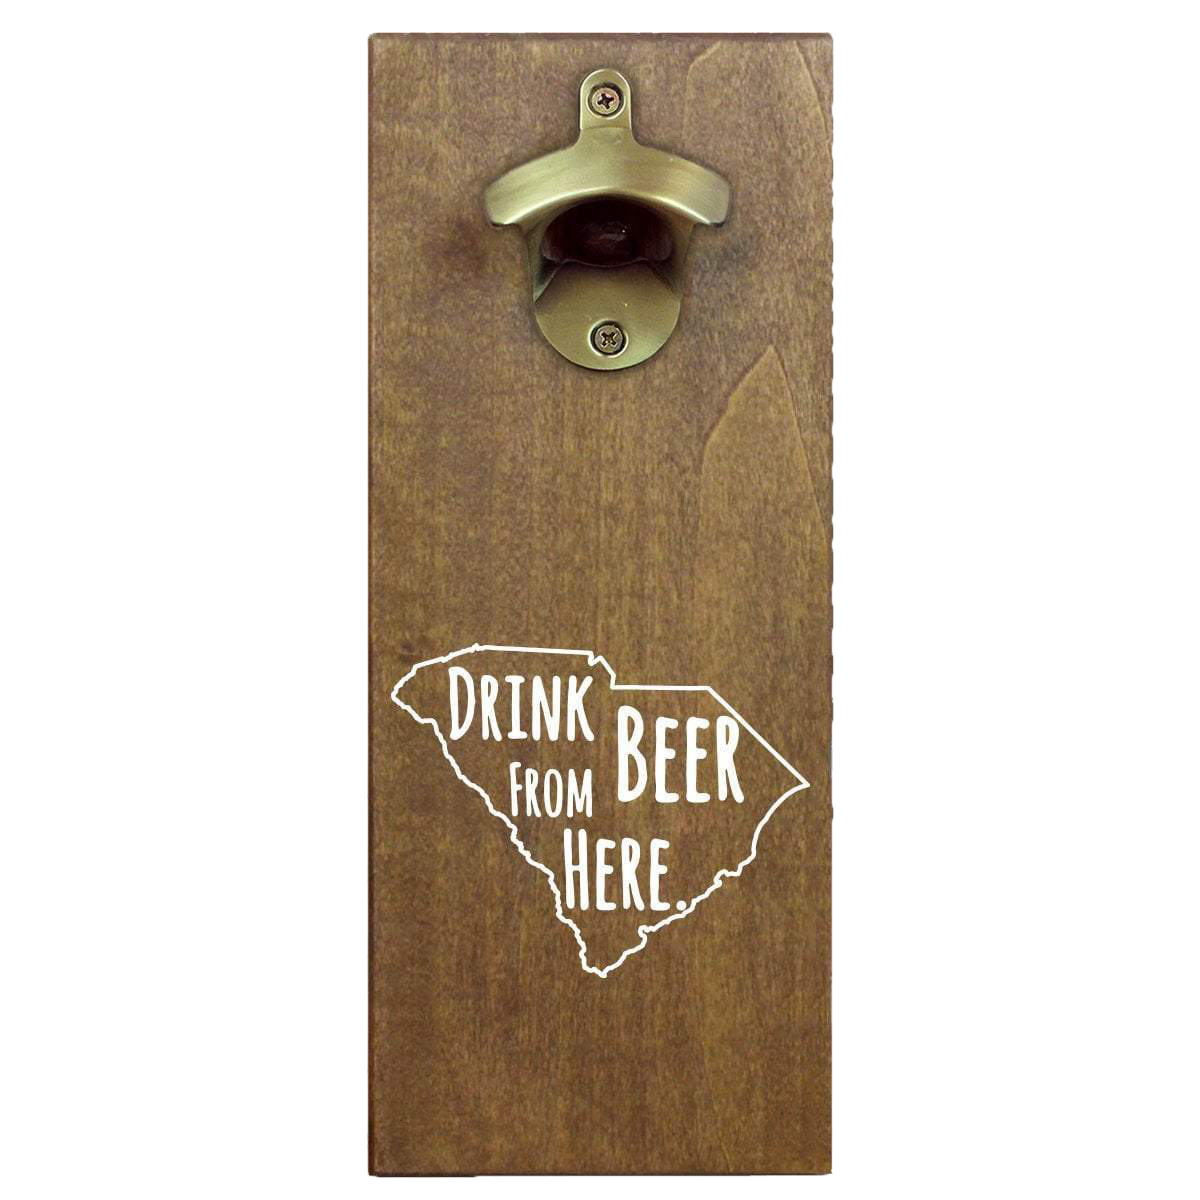 South Carolina Drink Beer From Here Wall Mounted Bottle Opener